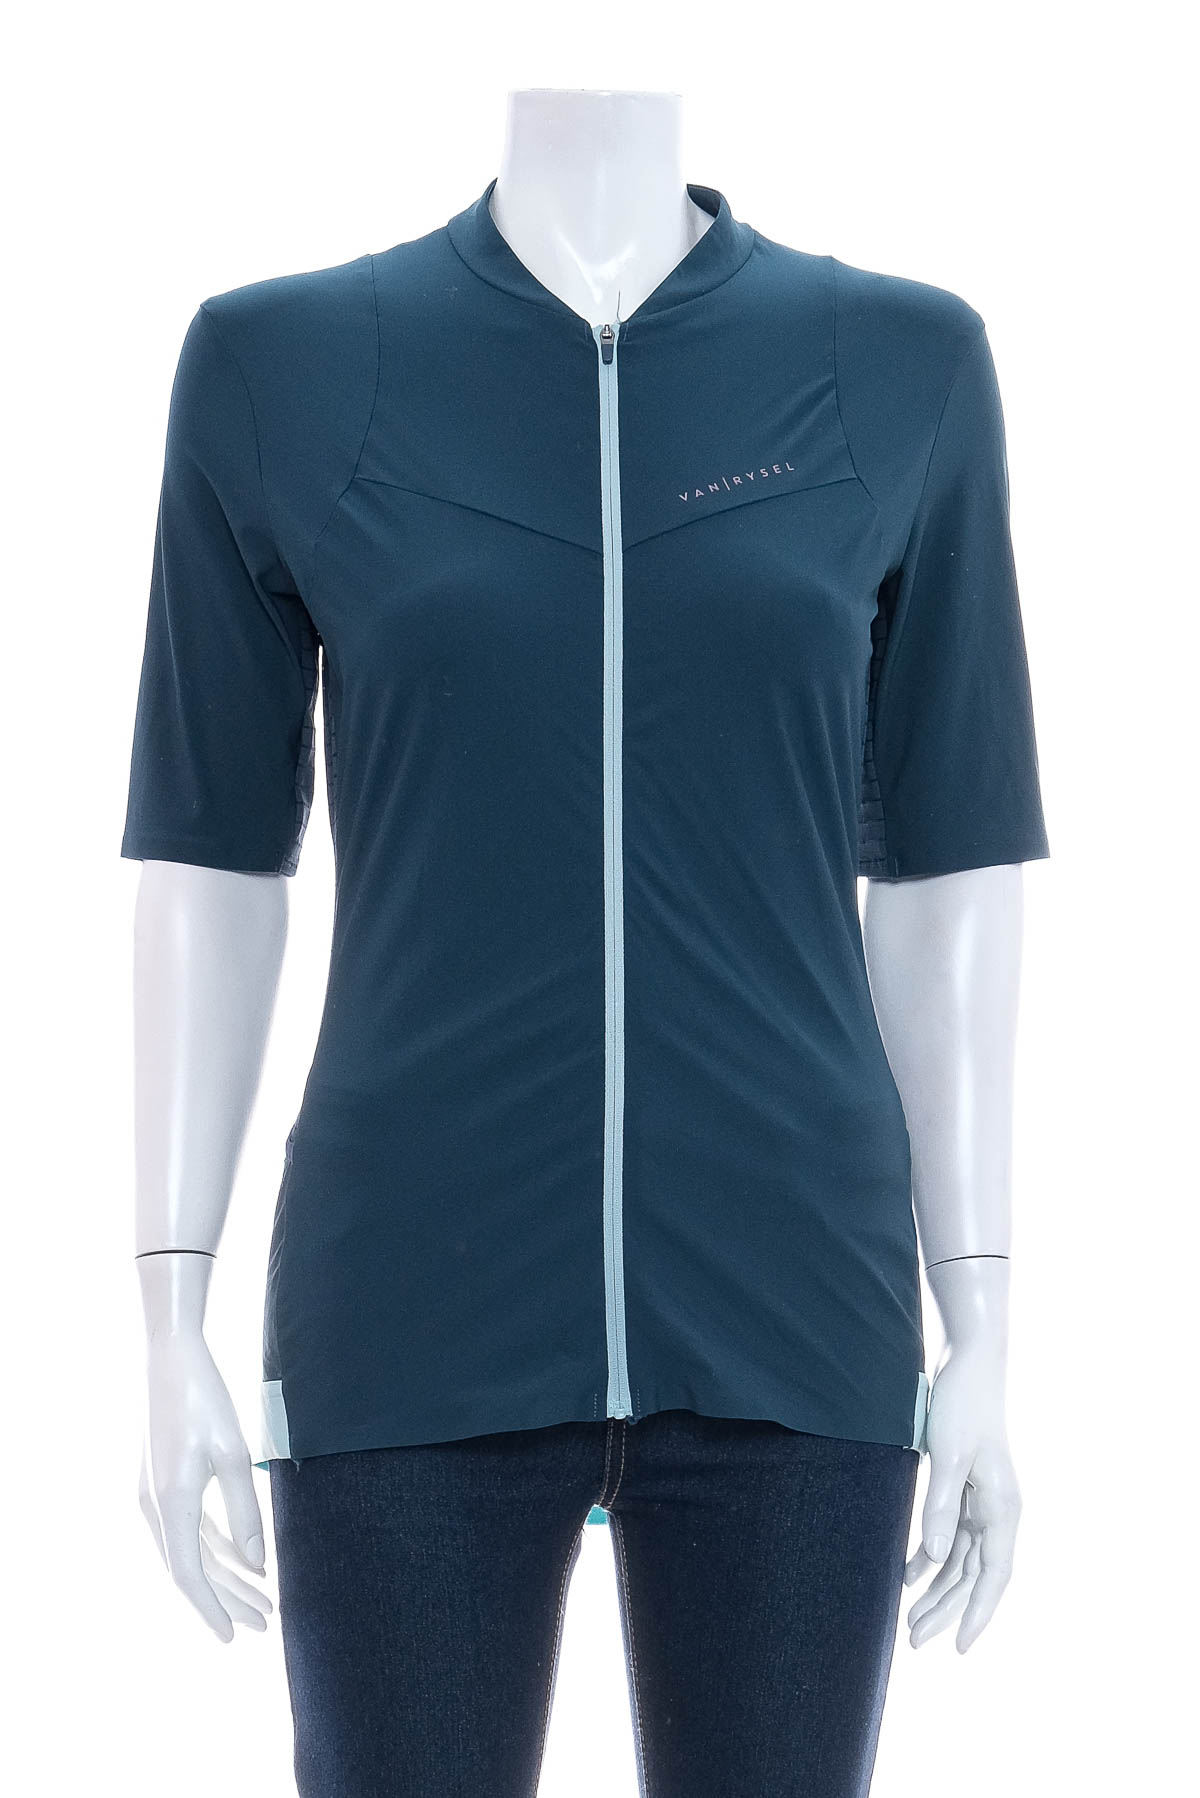 Female sports top for cycling - VAN RYSEL - 0